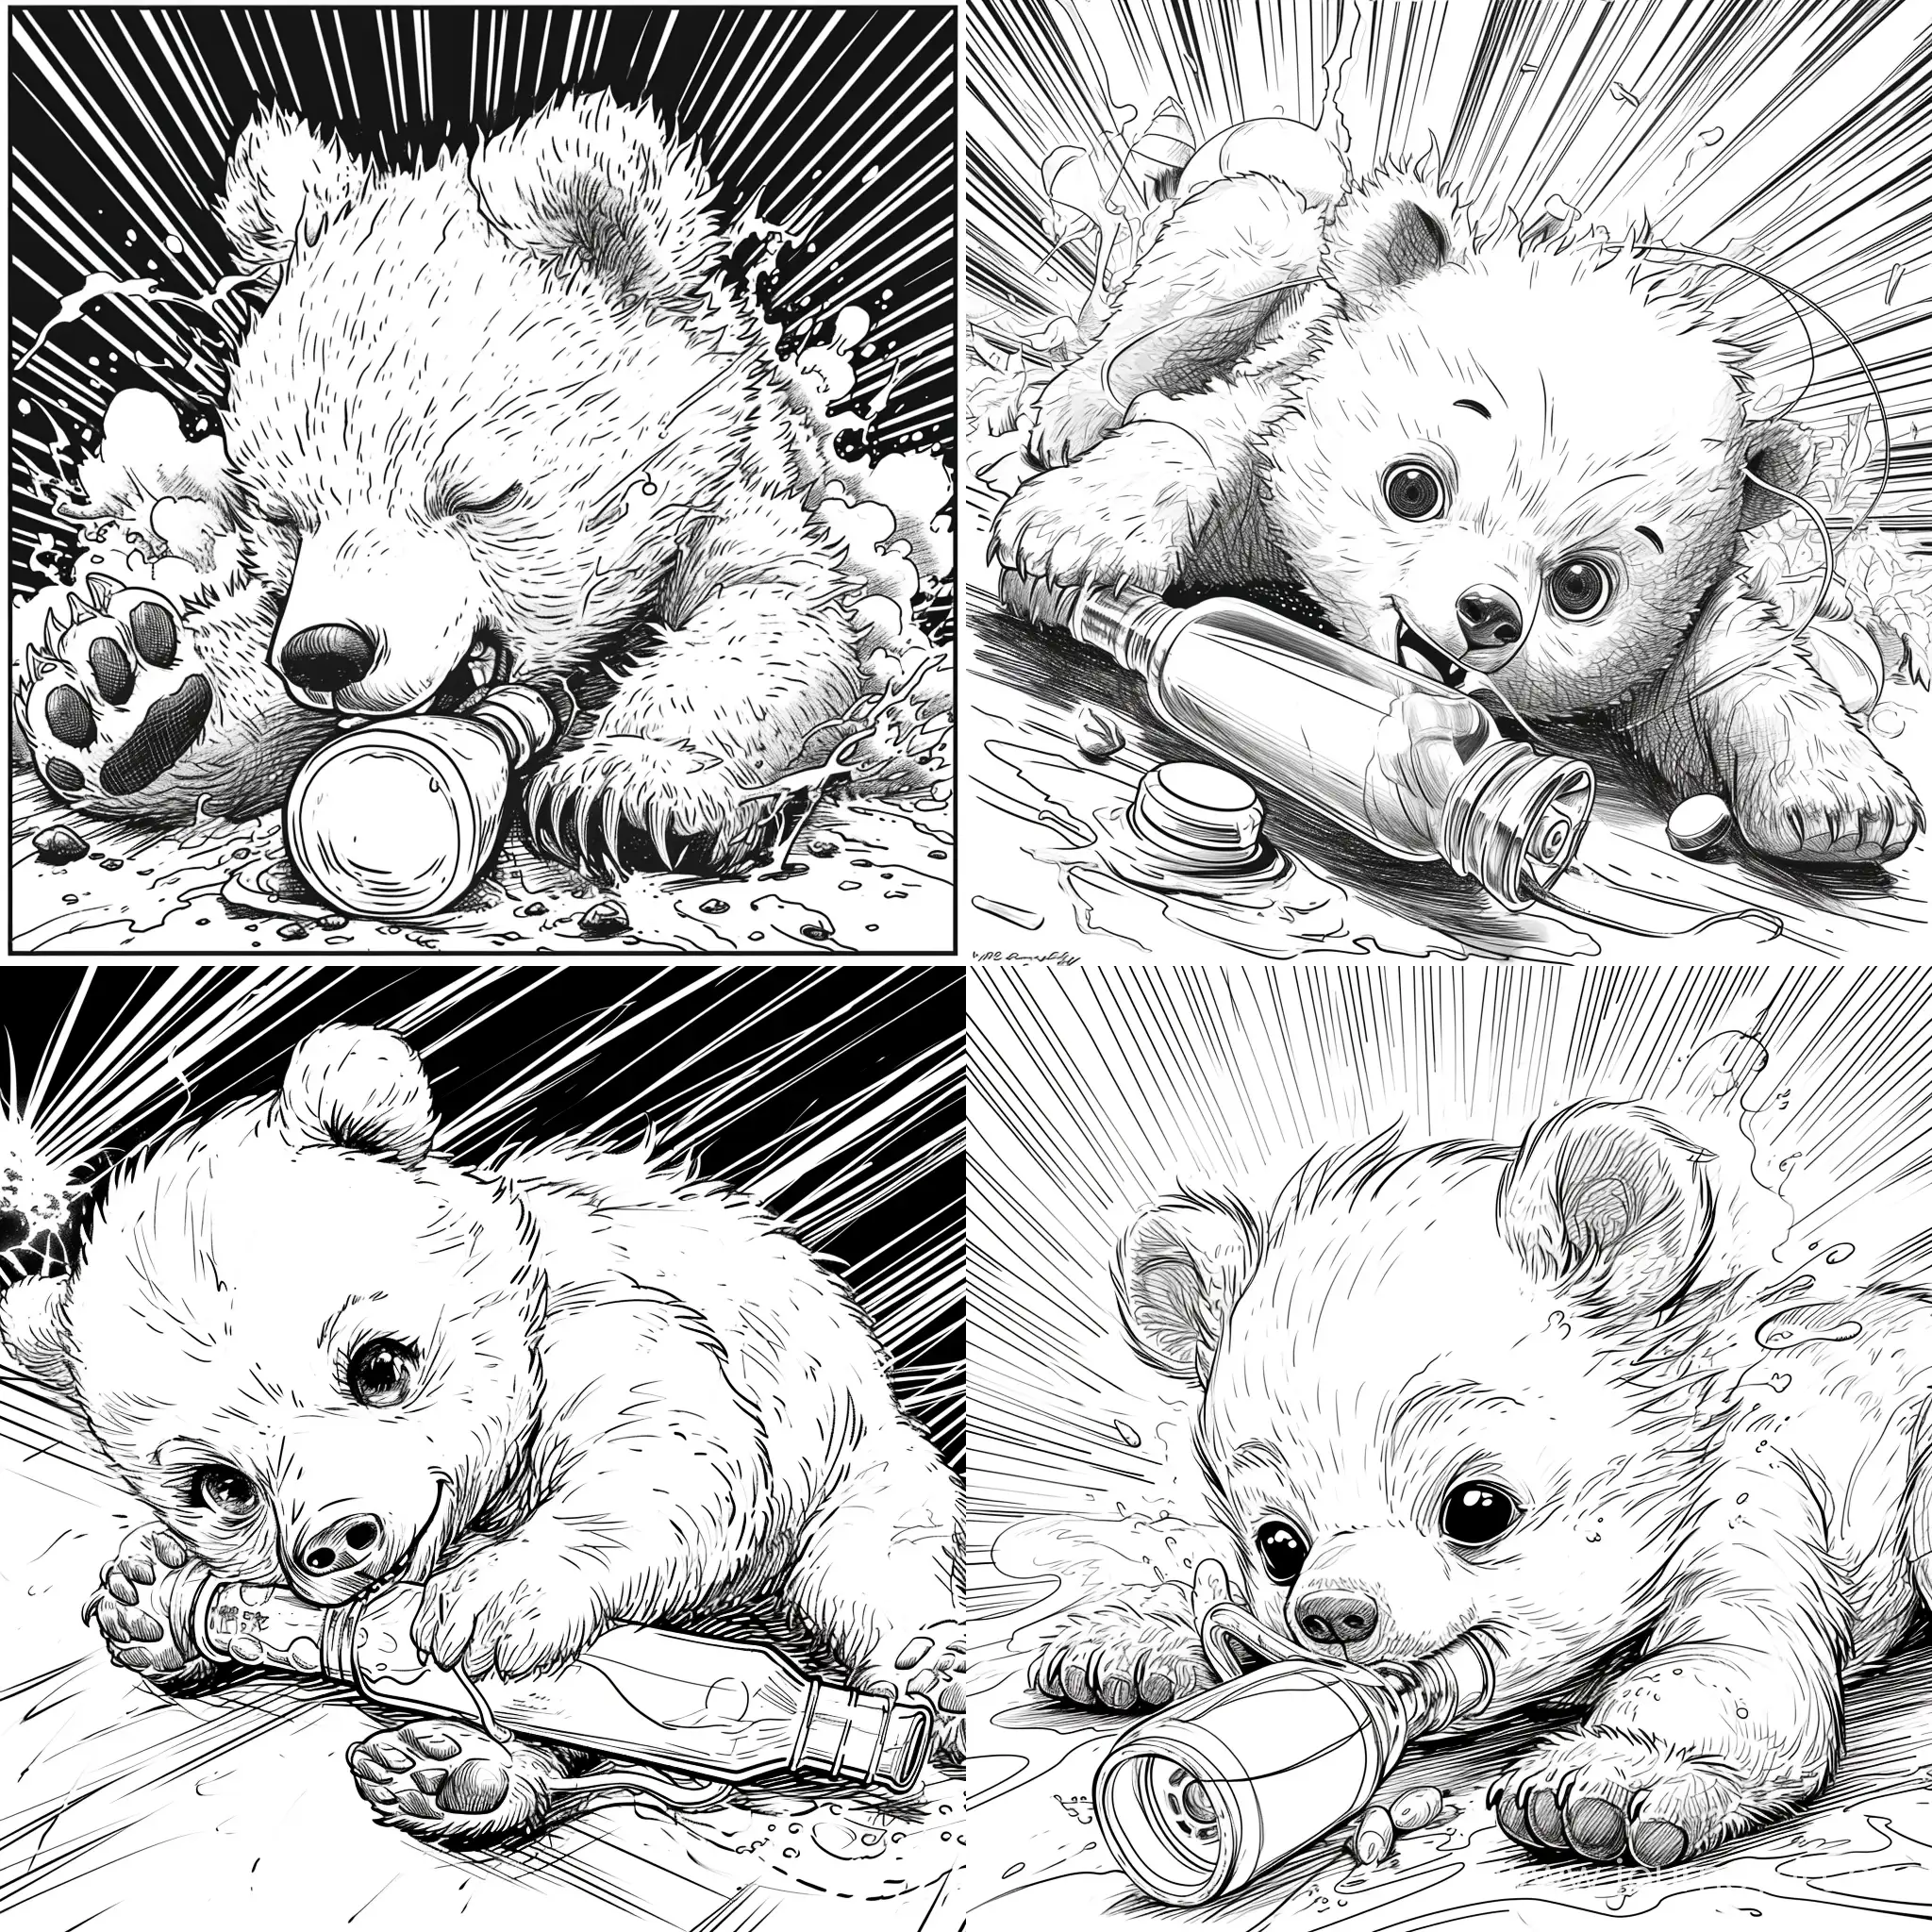 Adorable-Manga-Baby-Bear-Cub-Bong-Bottle-Time-in-Classic-90s-Style